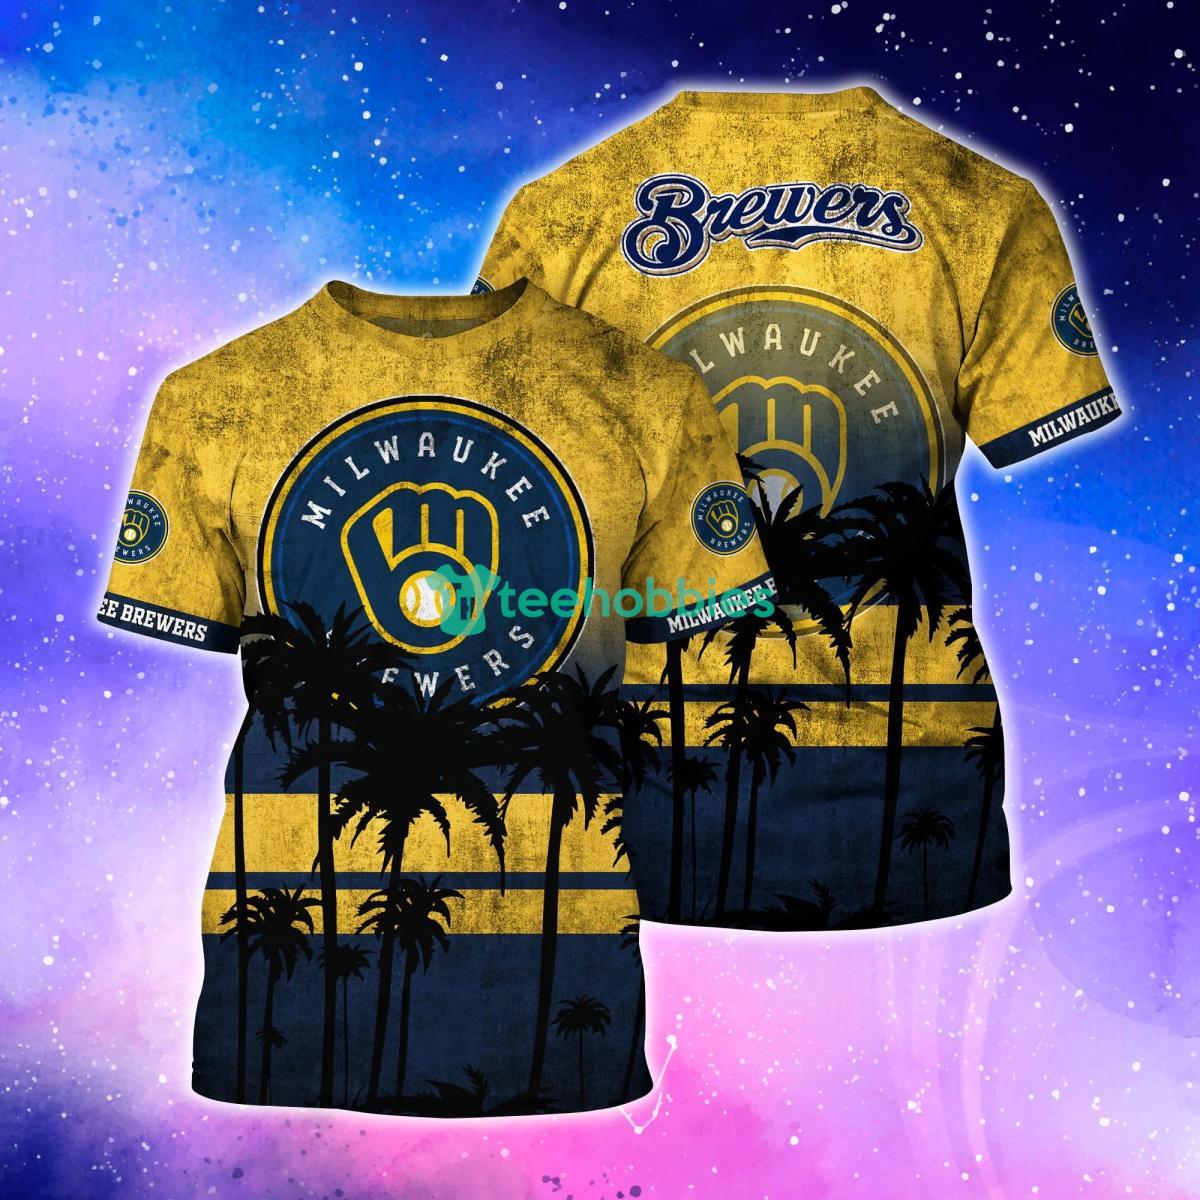 brewers jersey 2022